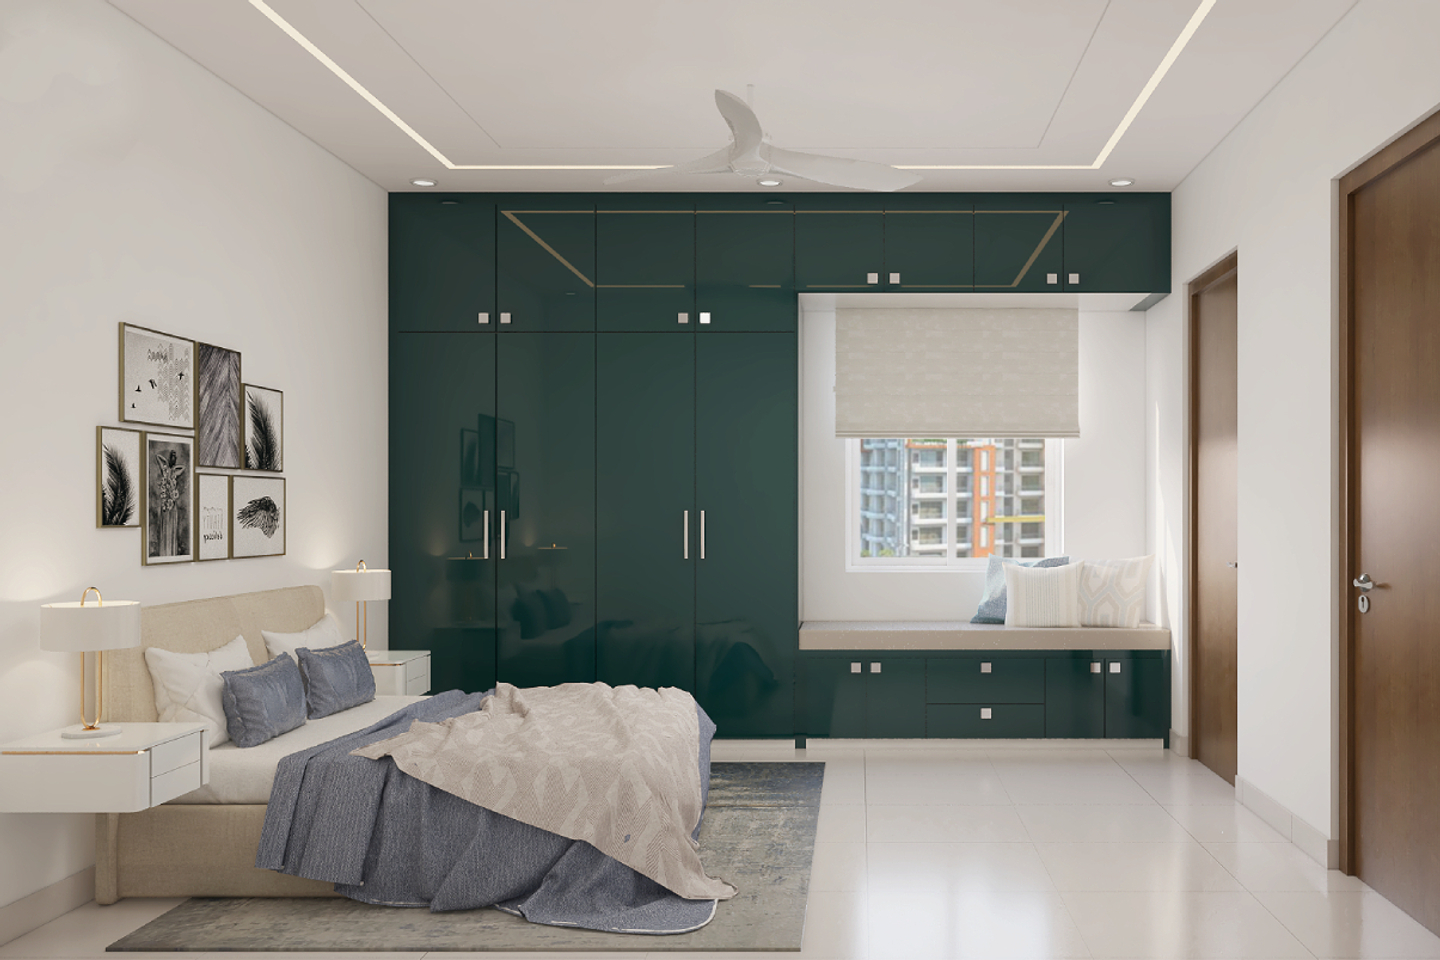 Guest Room With Green Wardrobe - Livspace